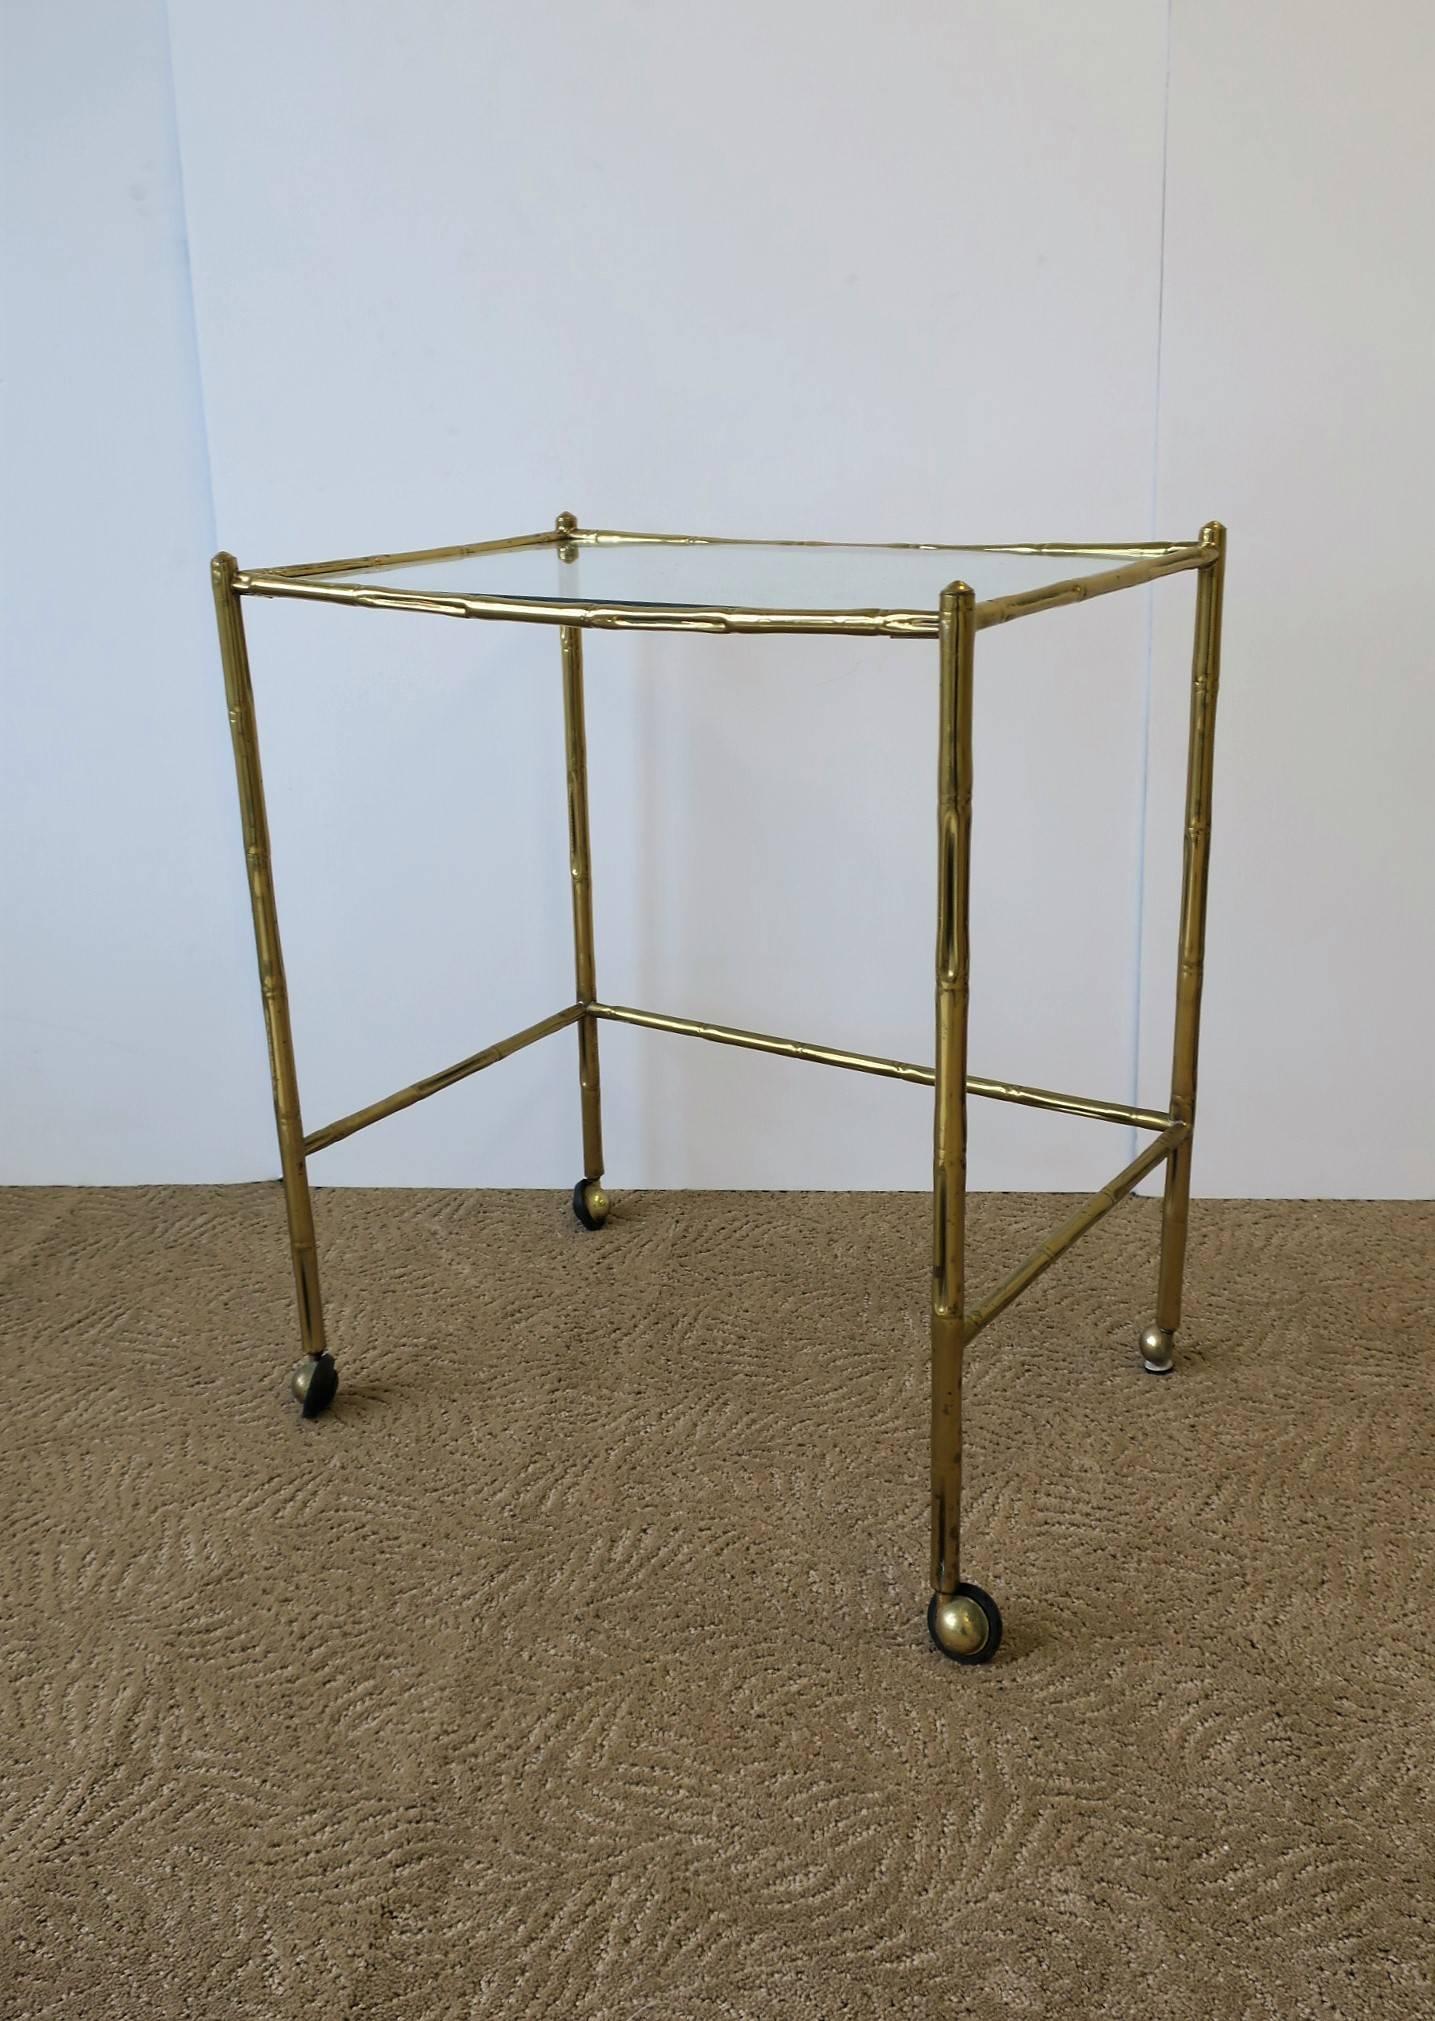 An Italian brass and glass bar cart table, circa early to mid-20th century, Italy, circa 1940s. Tables brass 'bamboo' style frame is light weight with a nicely weighted inset glass top. Dimensions: 20.75